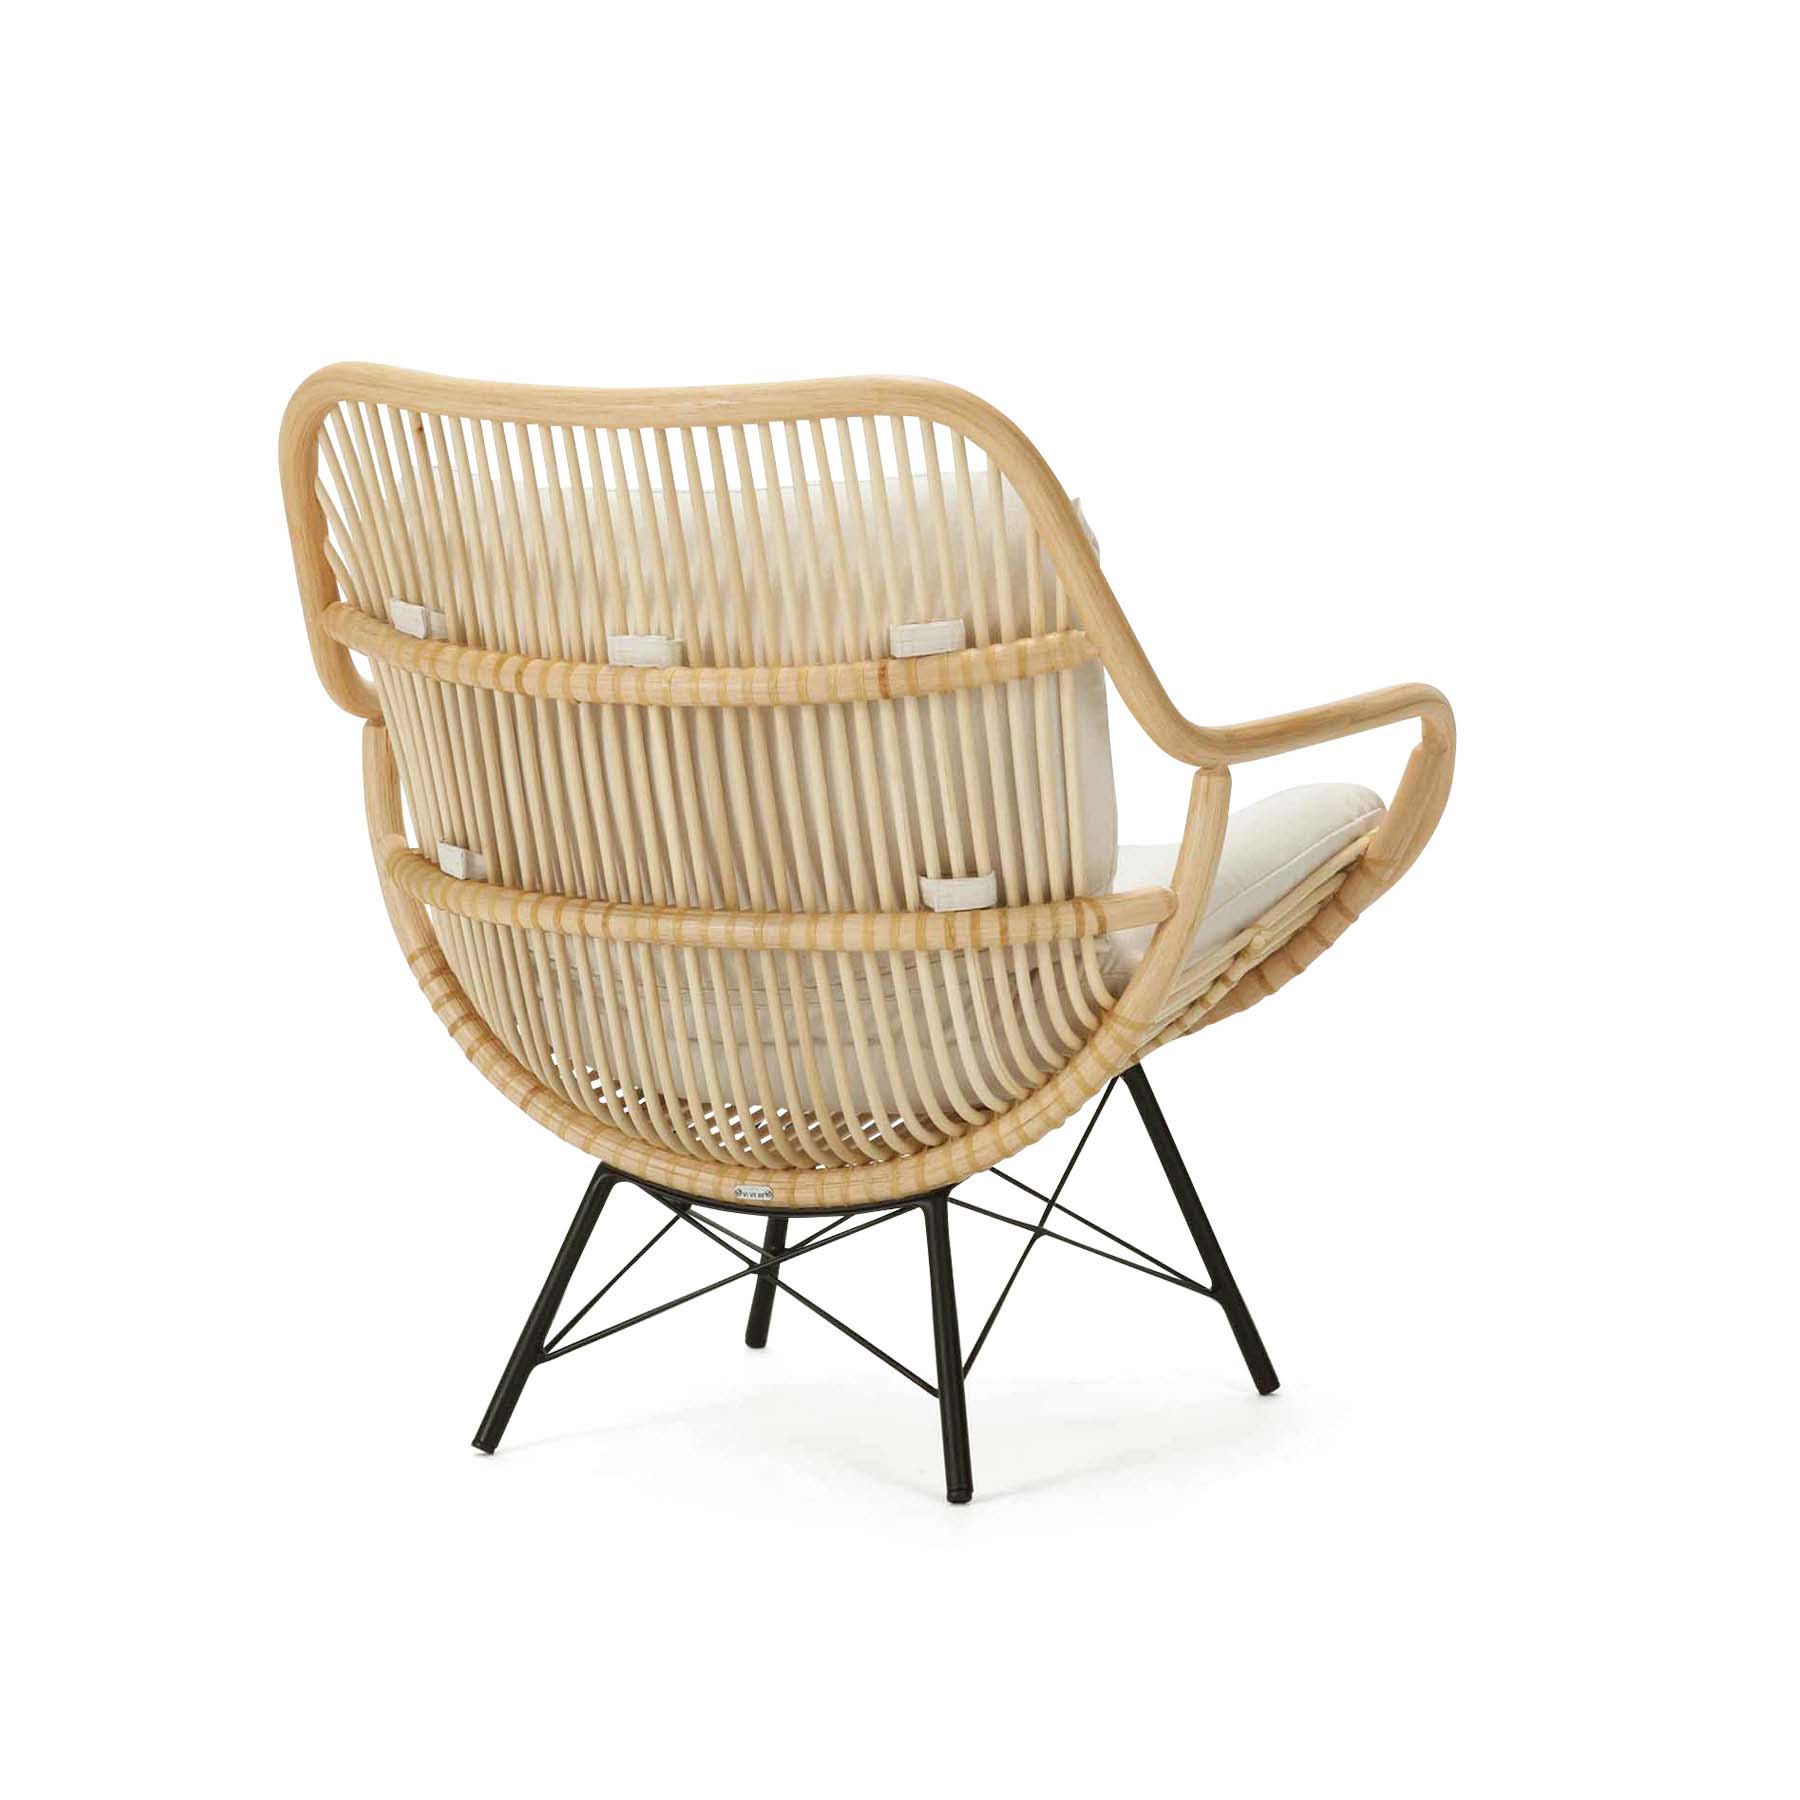 ASIENTO LOUNGE CHAIR | 【ASPLUND CONTRACT】 アスプルンド コントラクト